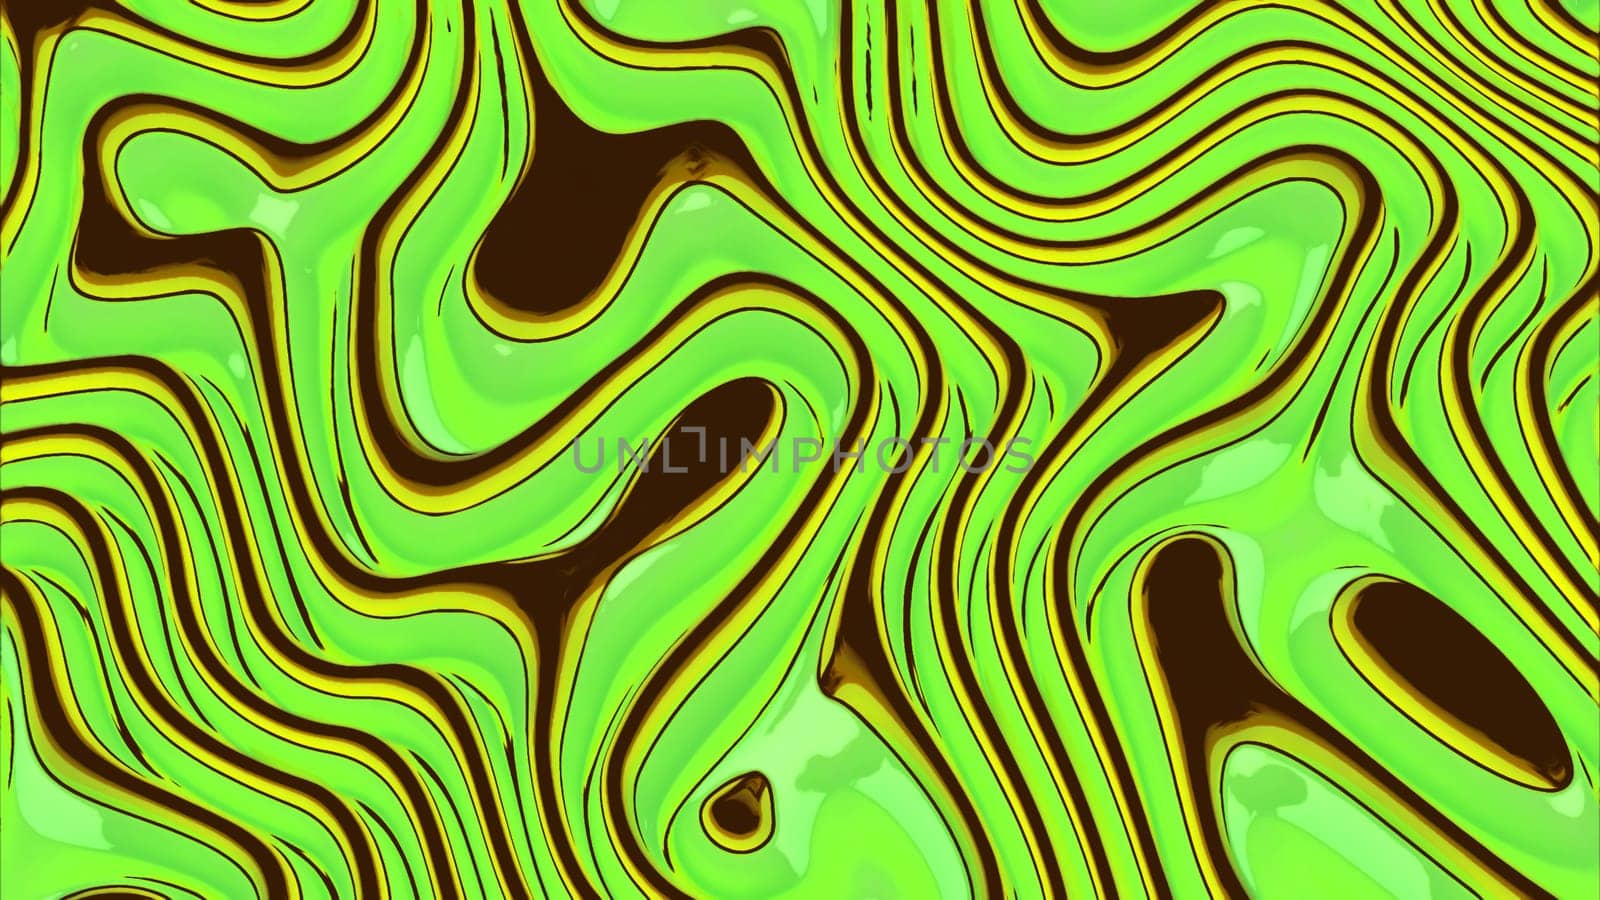 Abstract gradient waves background. Design. Green tones of transforming curves. by Mediawhalestock